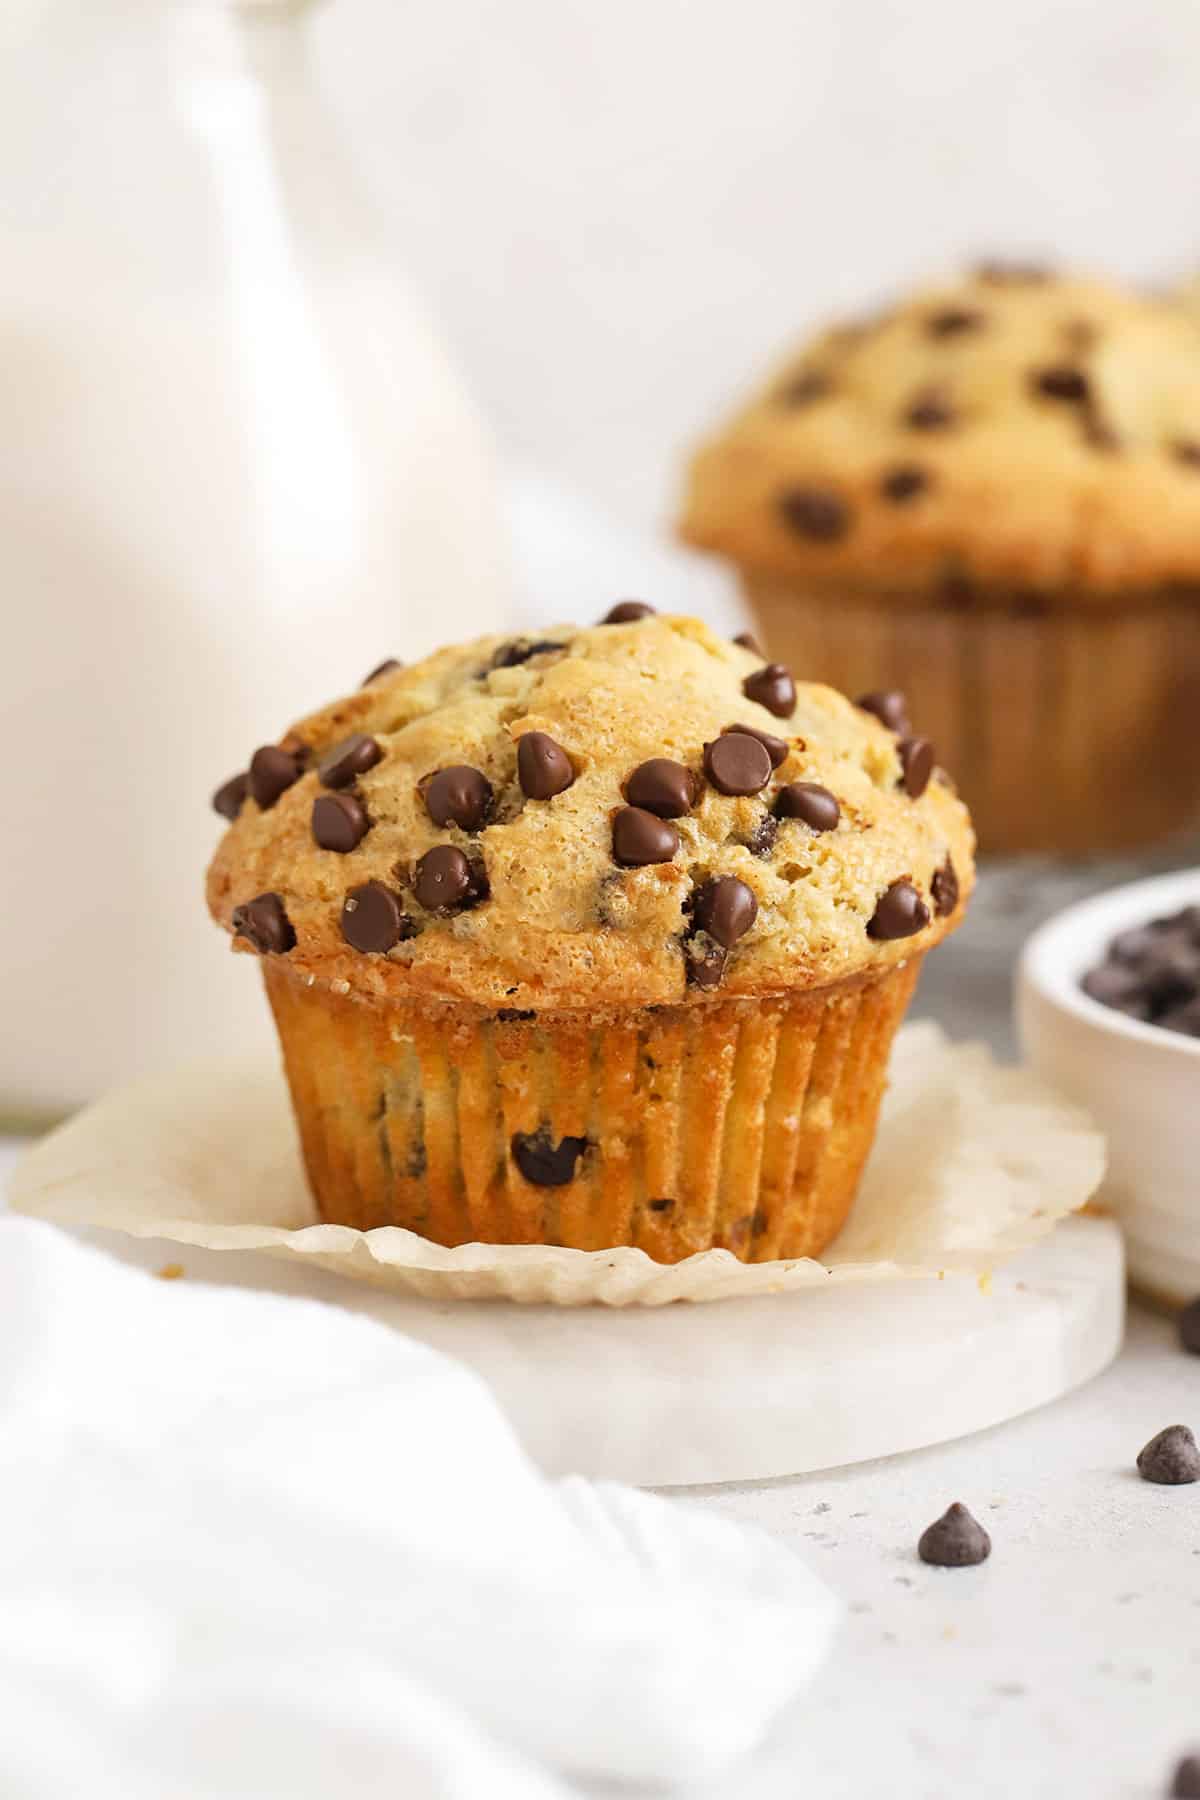 Bakery style gluten-free chocolate chip muffins with a bottle of milk